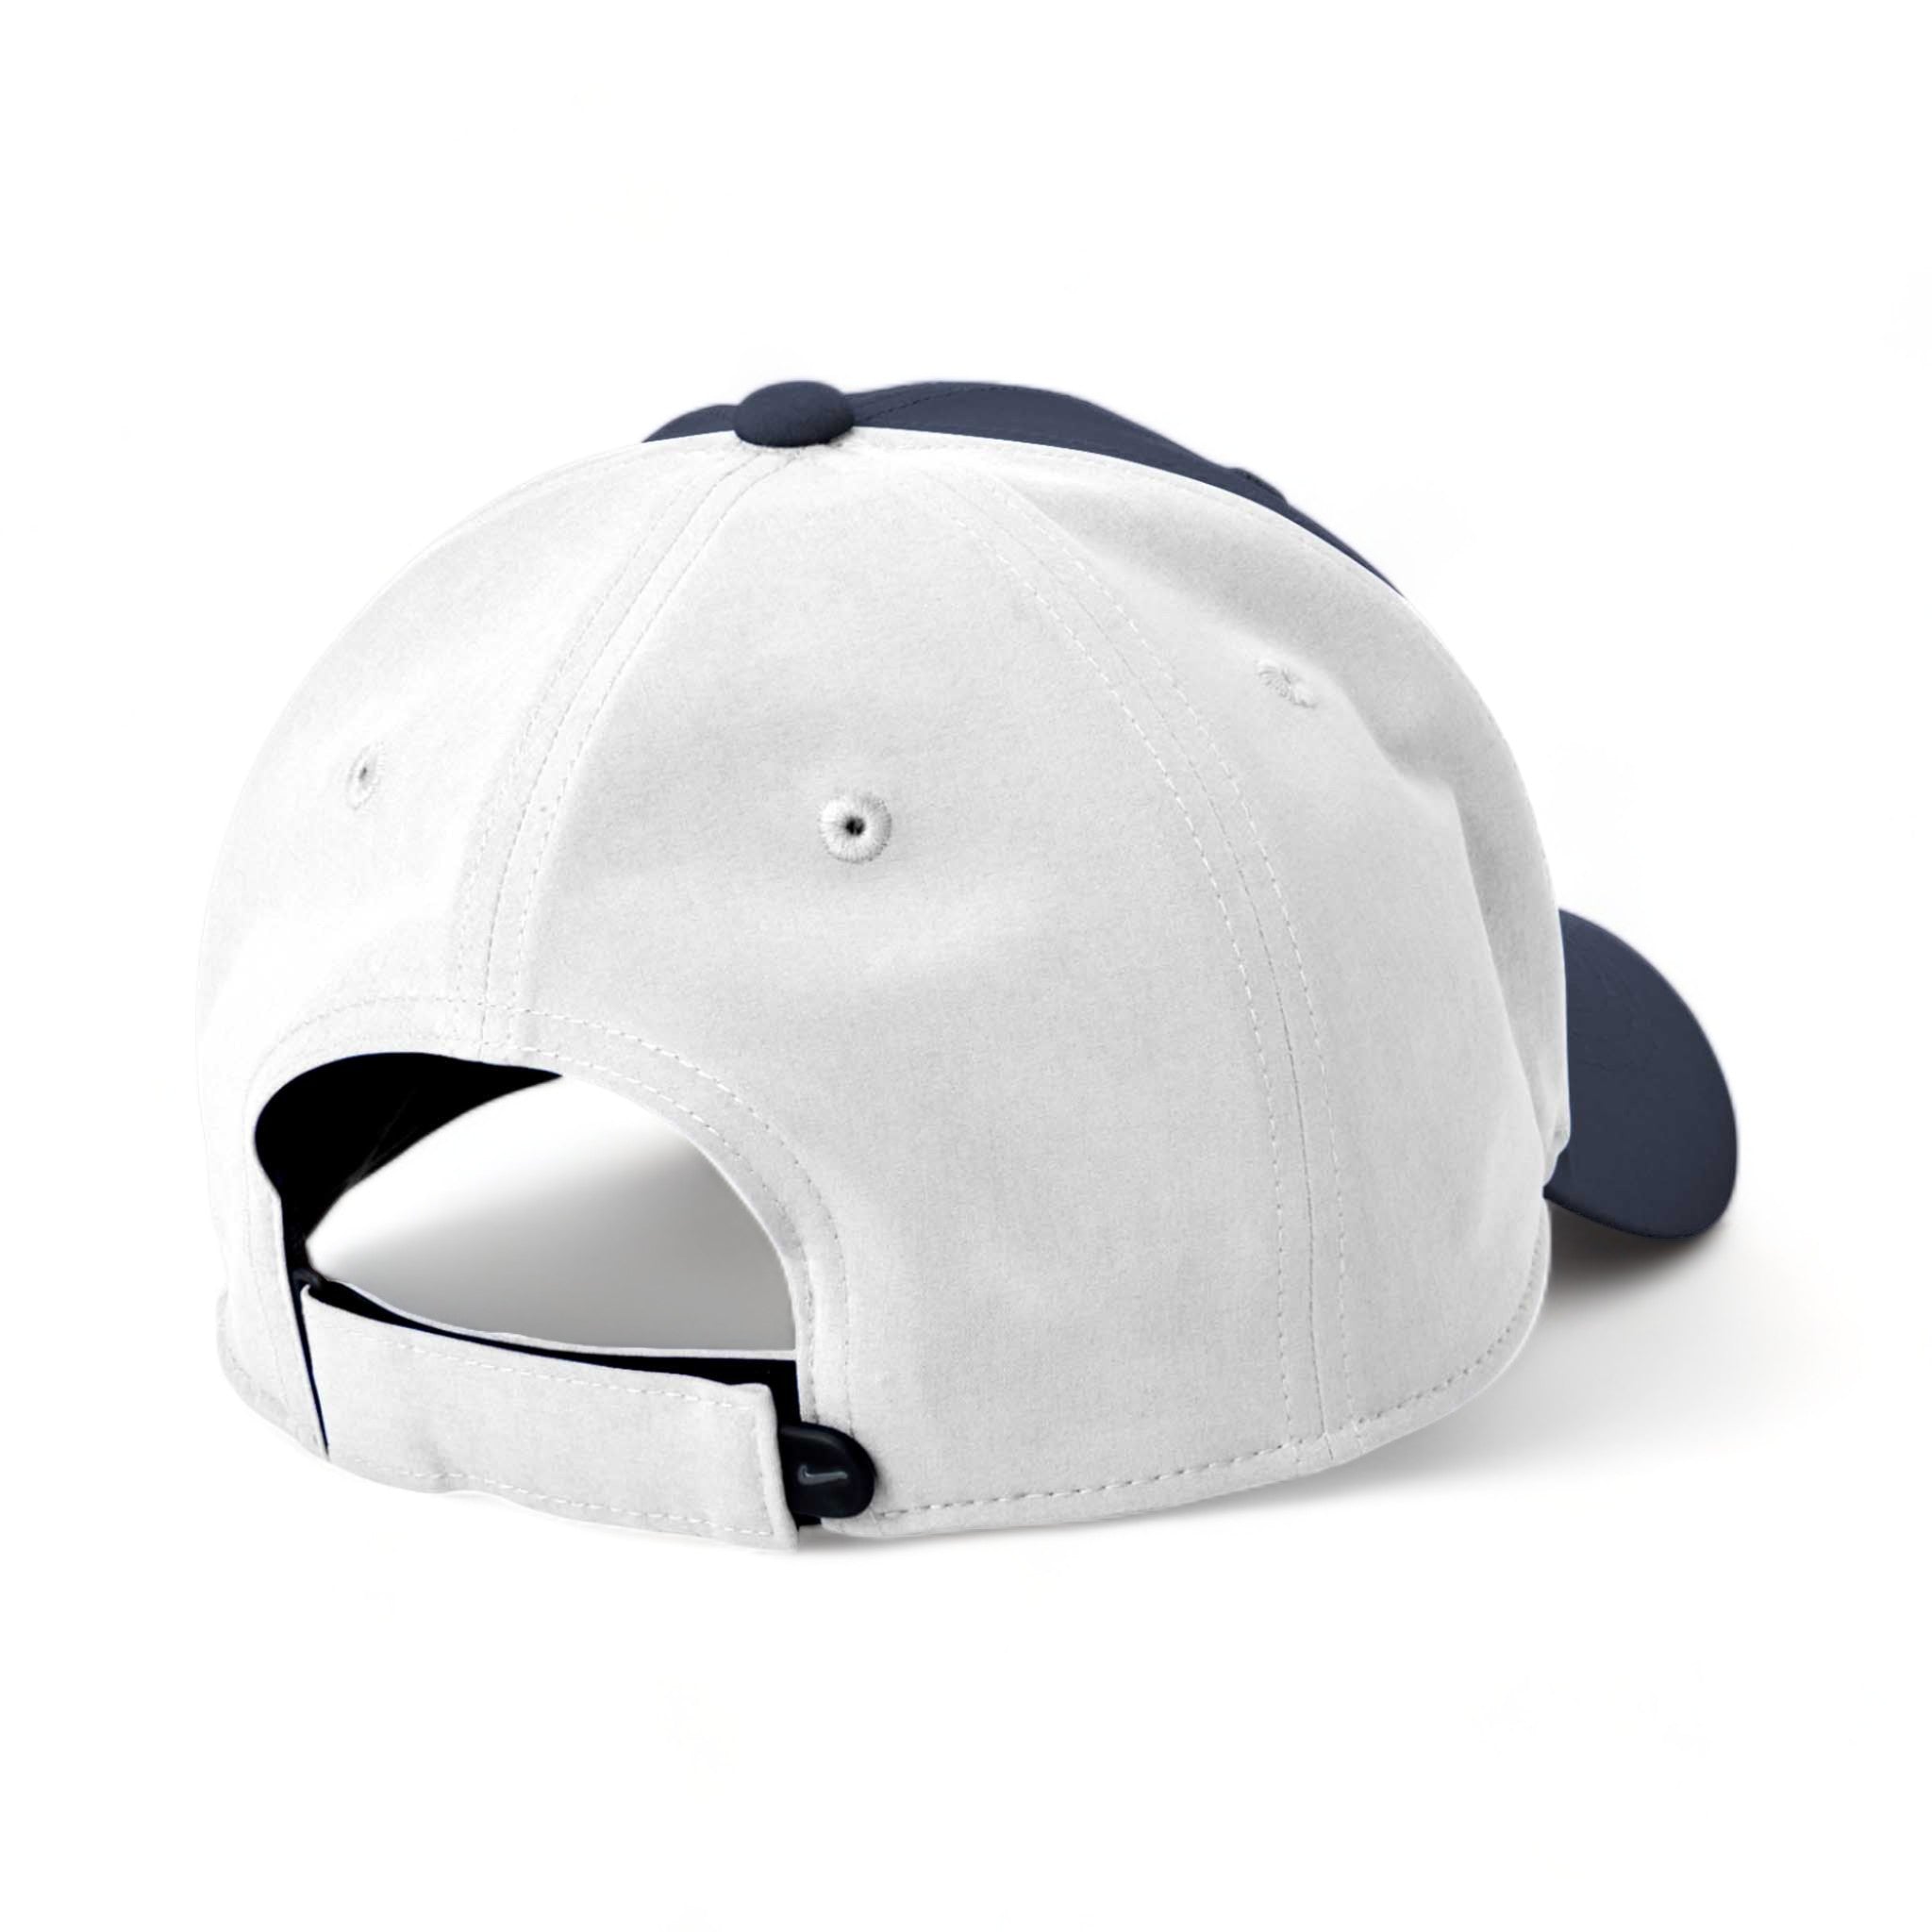 Back view of Nike NKFB6447 custom hat in navy and white